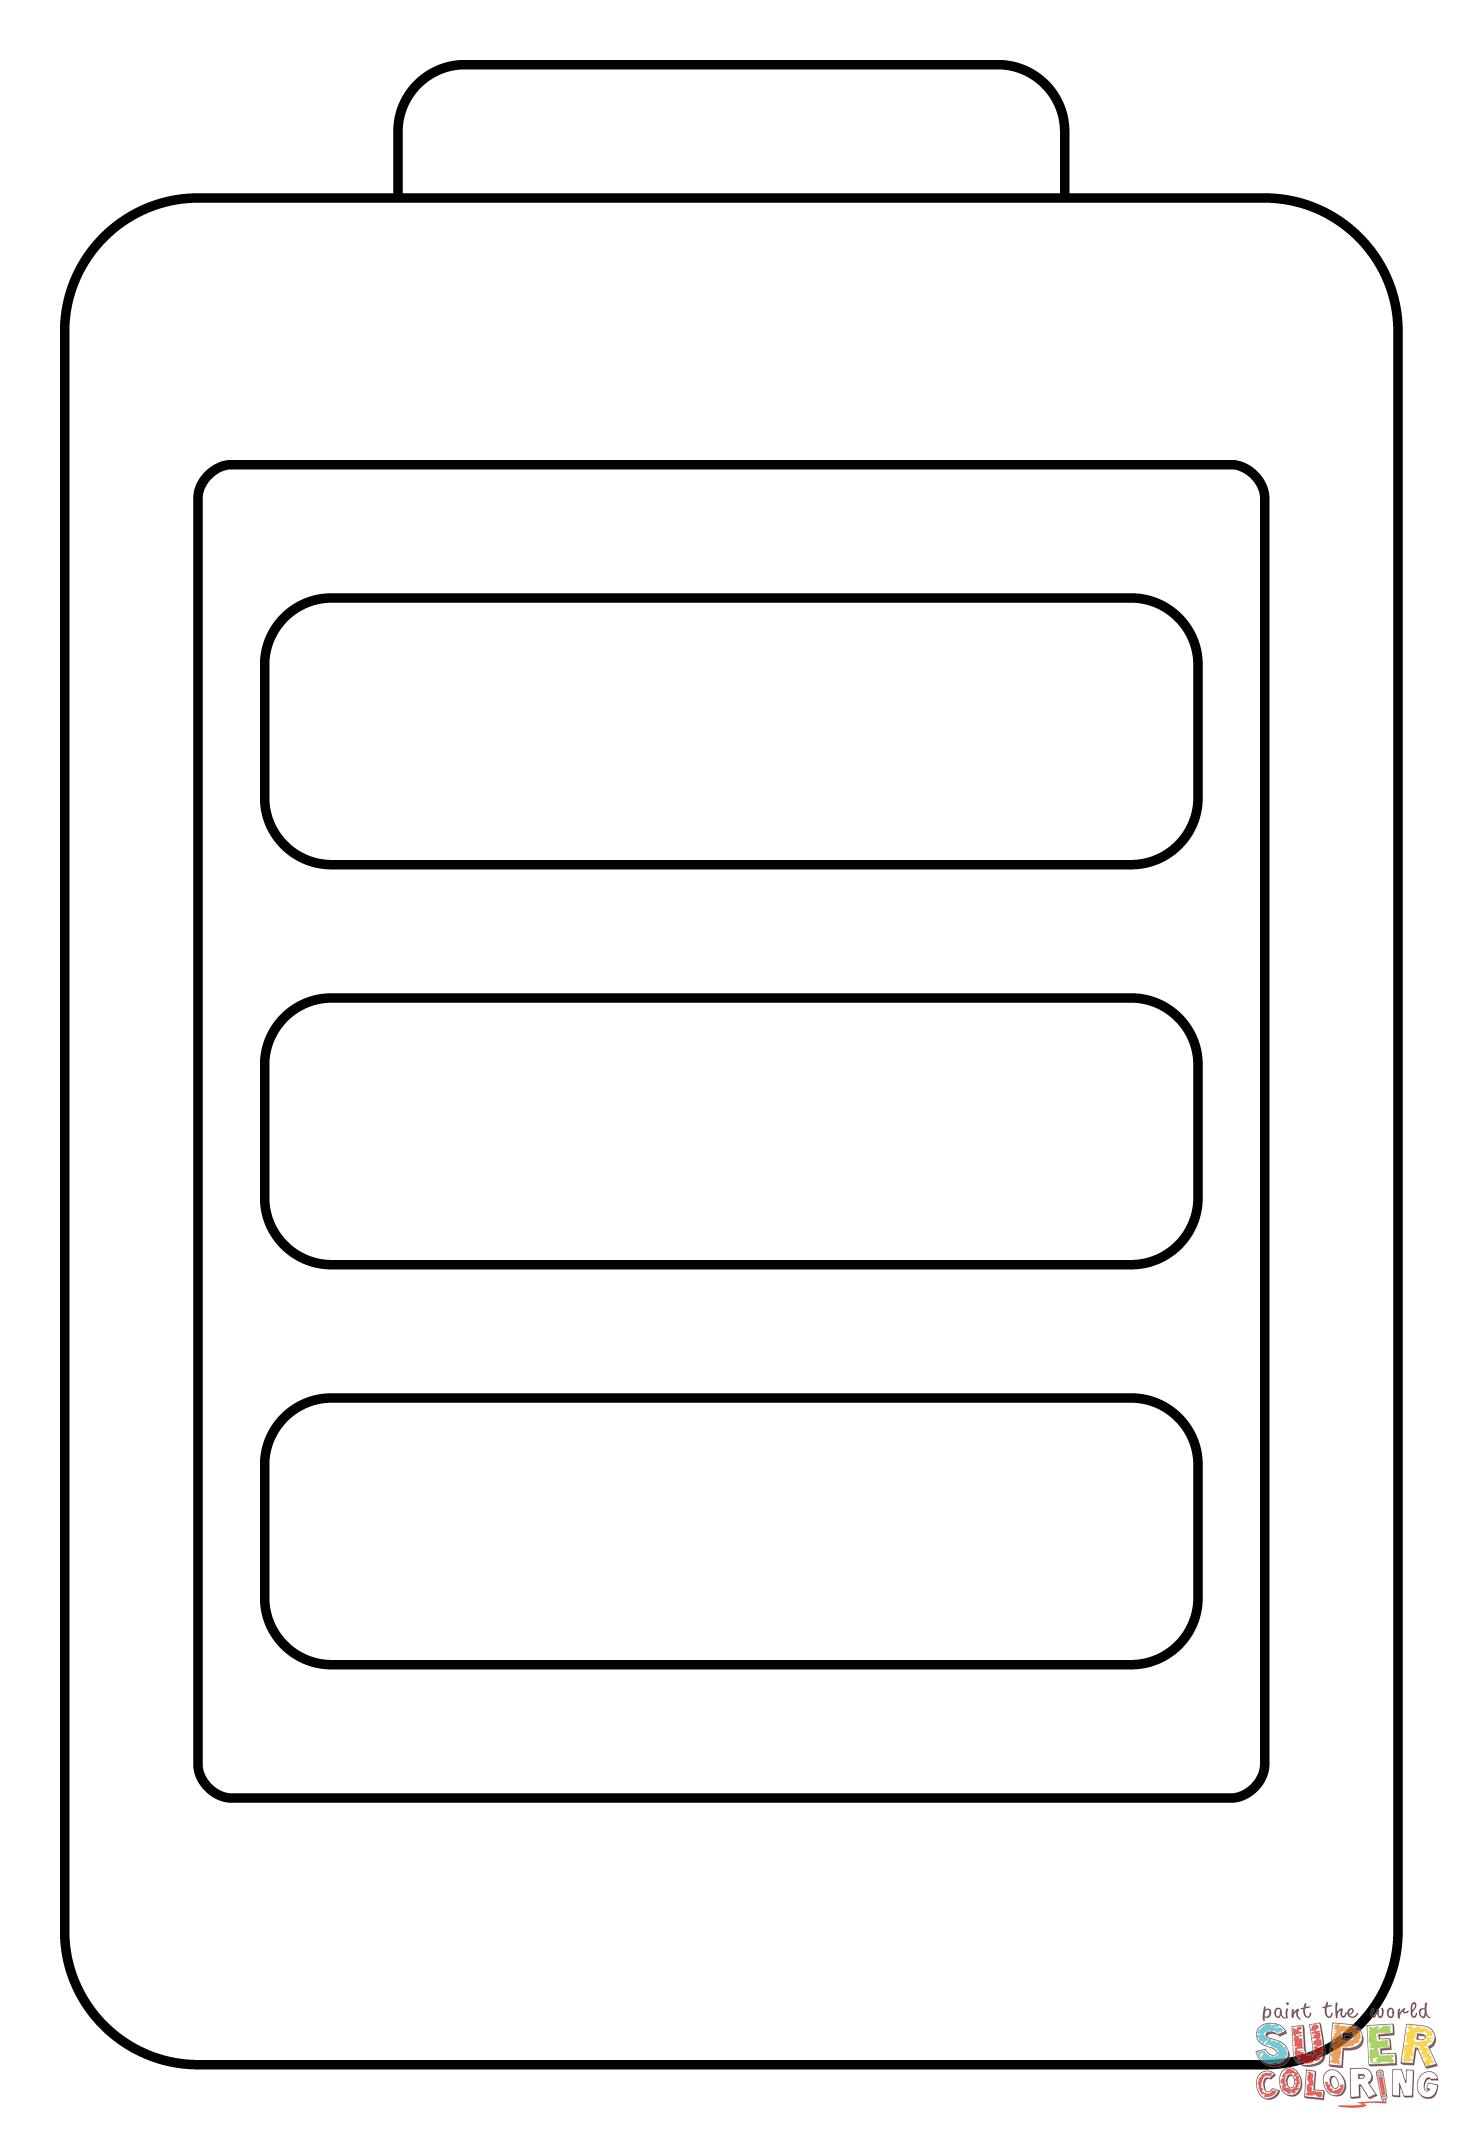 Battery coloring page free printable coloring pages